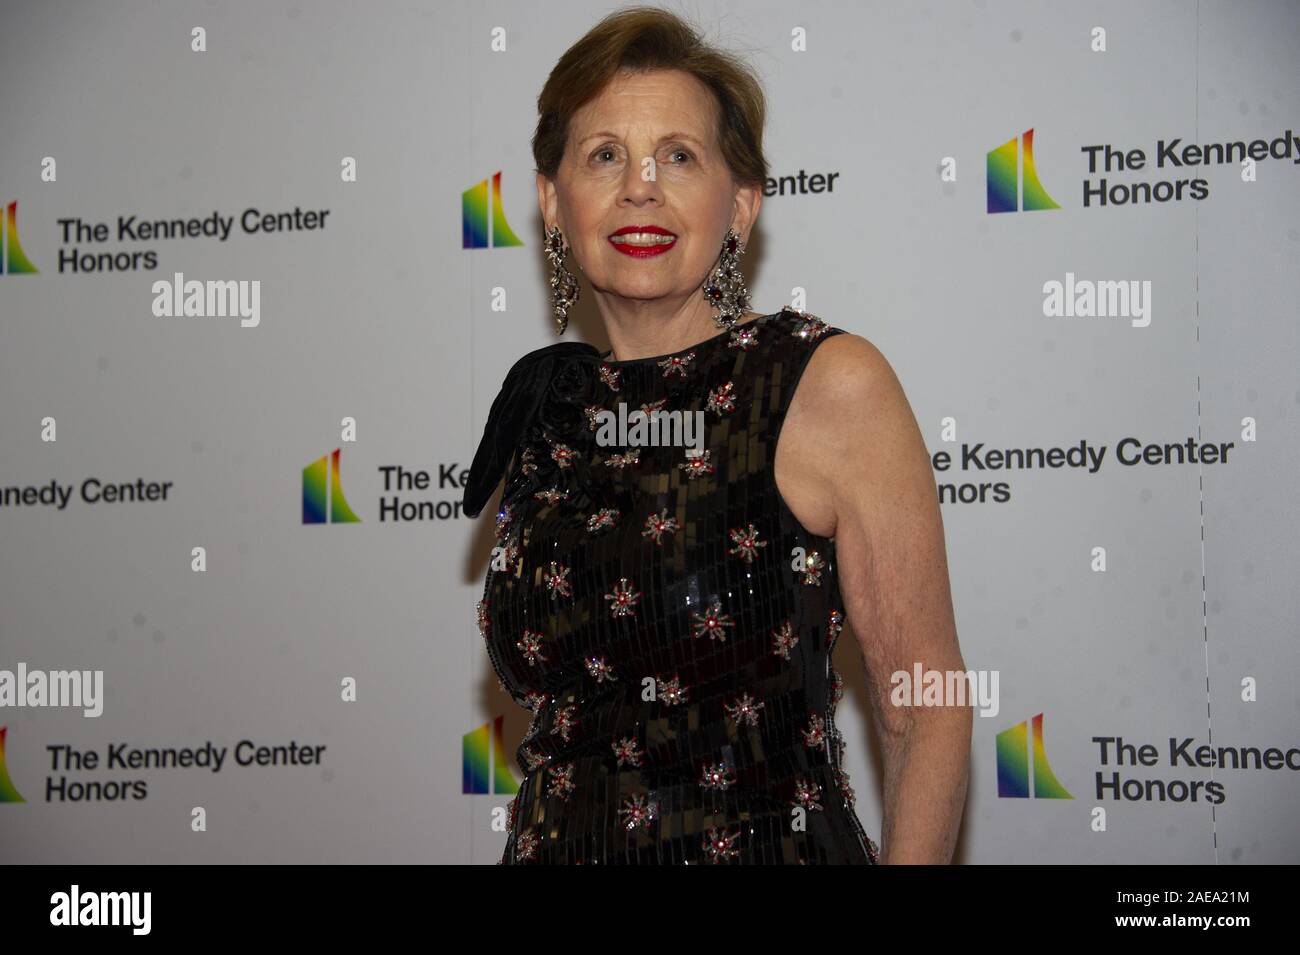 Washington DC, USA. 7th Dec, 2019. Adrienne Arsht arrives for the formal Artist's Dinner honoring the recipients of the 42nd Annual Kennedy Center Honors at the United States Department of State in Washington, DC on Saturday, December 7, 2019. The 2019 honorees are: Earth, Wind & Fire, Sally Field, Linda Ronstadt, Sesame Street, and Michael Tilson Thomas Credit: Ron Sachs/CNP/ZUMA Wire/Alamy Live News Stock Photo